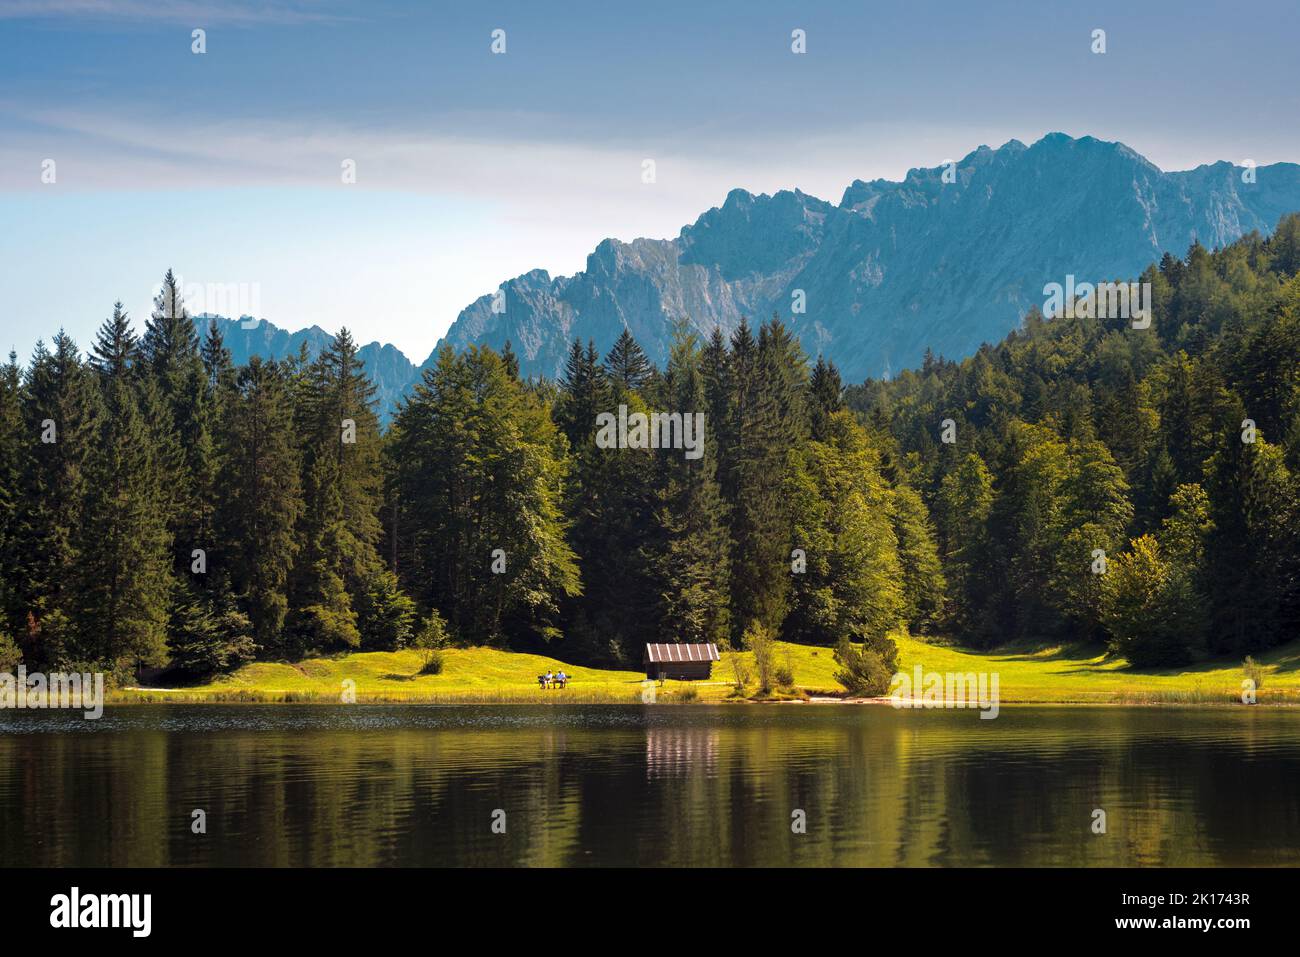 Alpine lake shore with old wooden barn Stock Photo